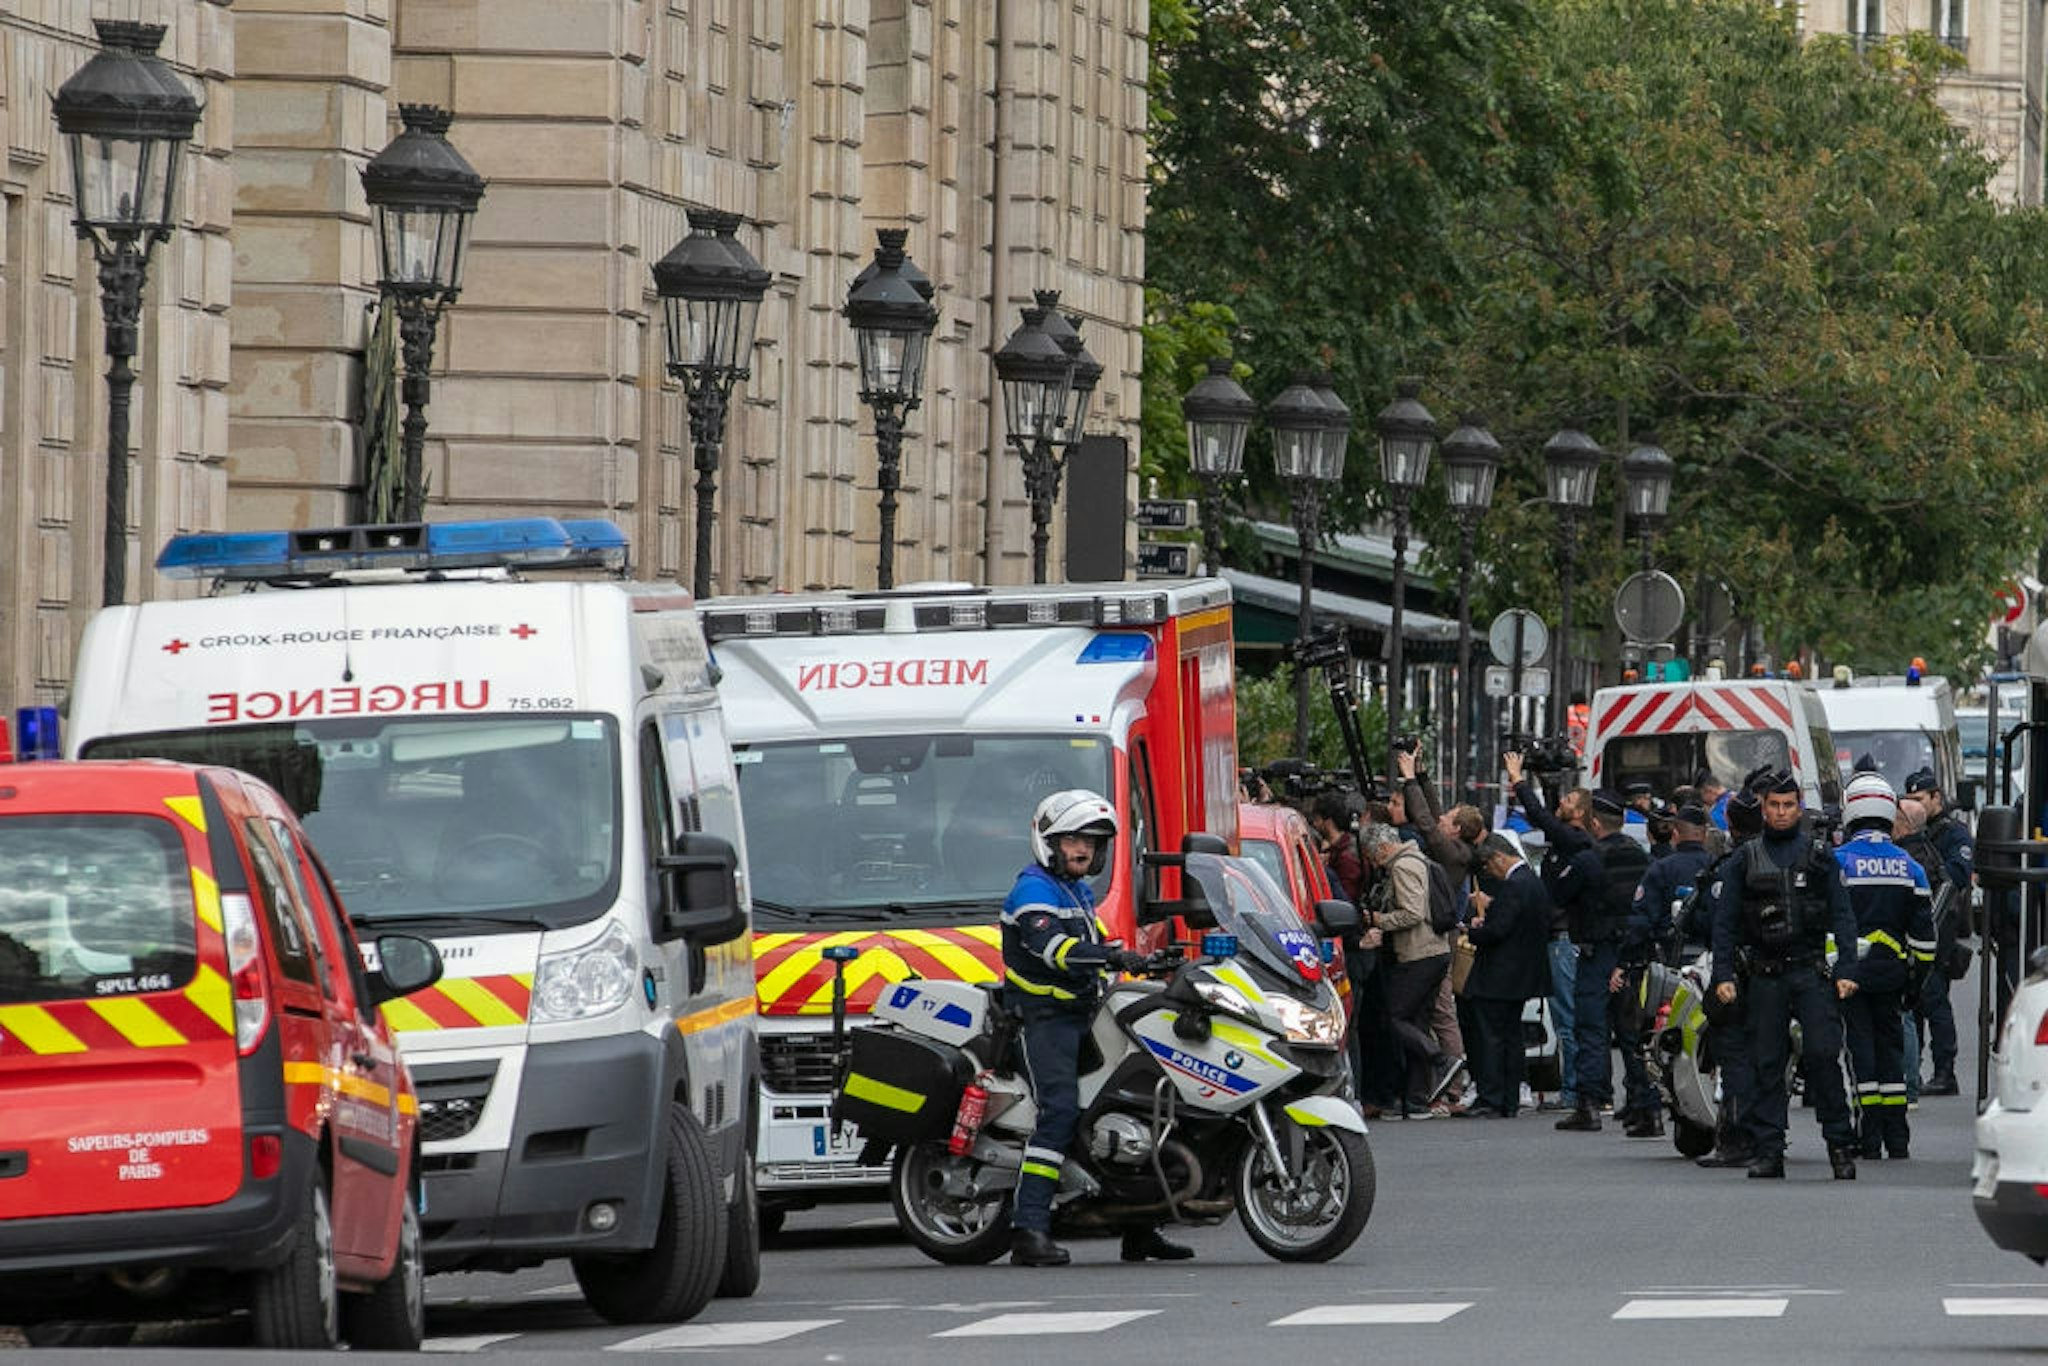 Journalists gather near Paris Police headquarters after four officers were killed in a knife attack on October 3, 2019 in Paris, France.